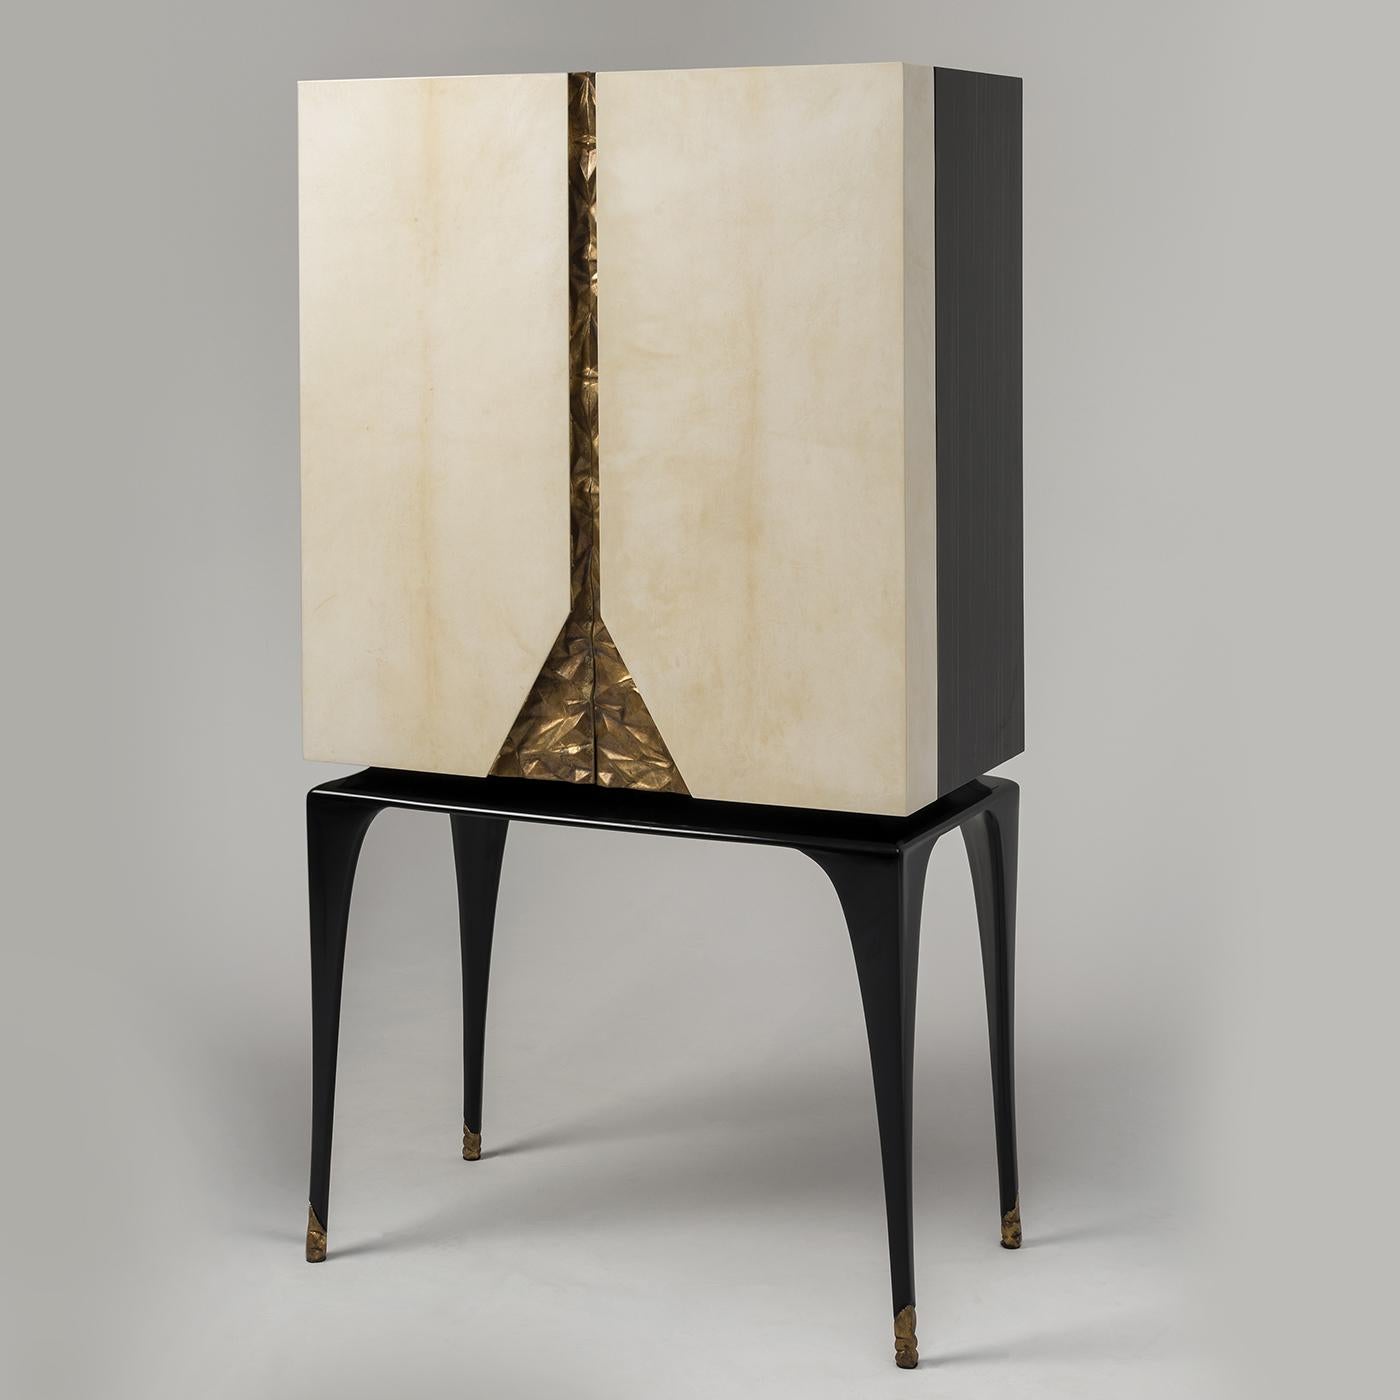 Stunning and brimming with style, the Martini Bar cabinet in Macassar ebony features glossy streaks in shaded orange, legs in black lacquered wood, doors in antique-looking polished ivory-colored parchment and detail in gold leaf, etched by hand.